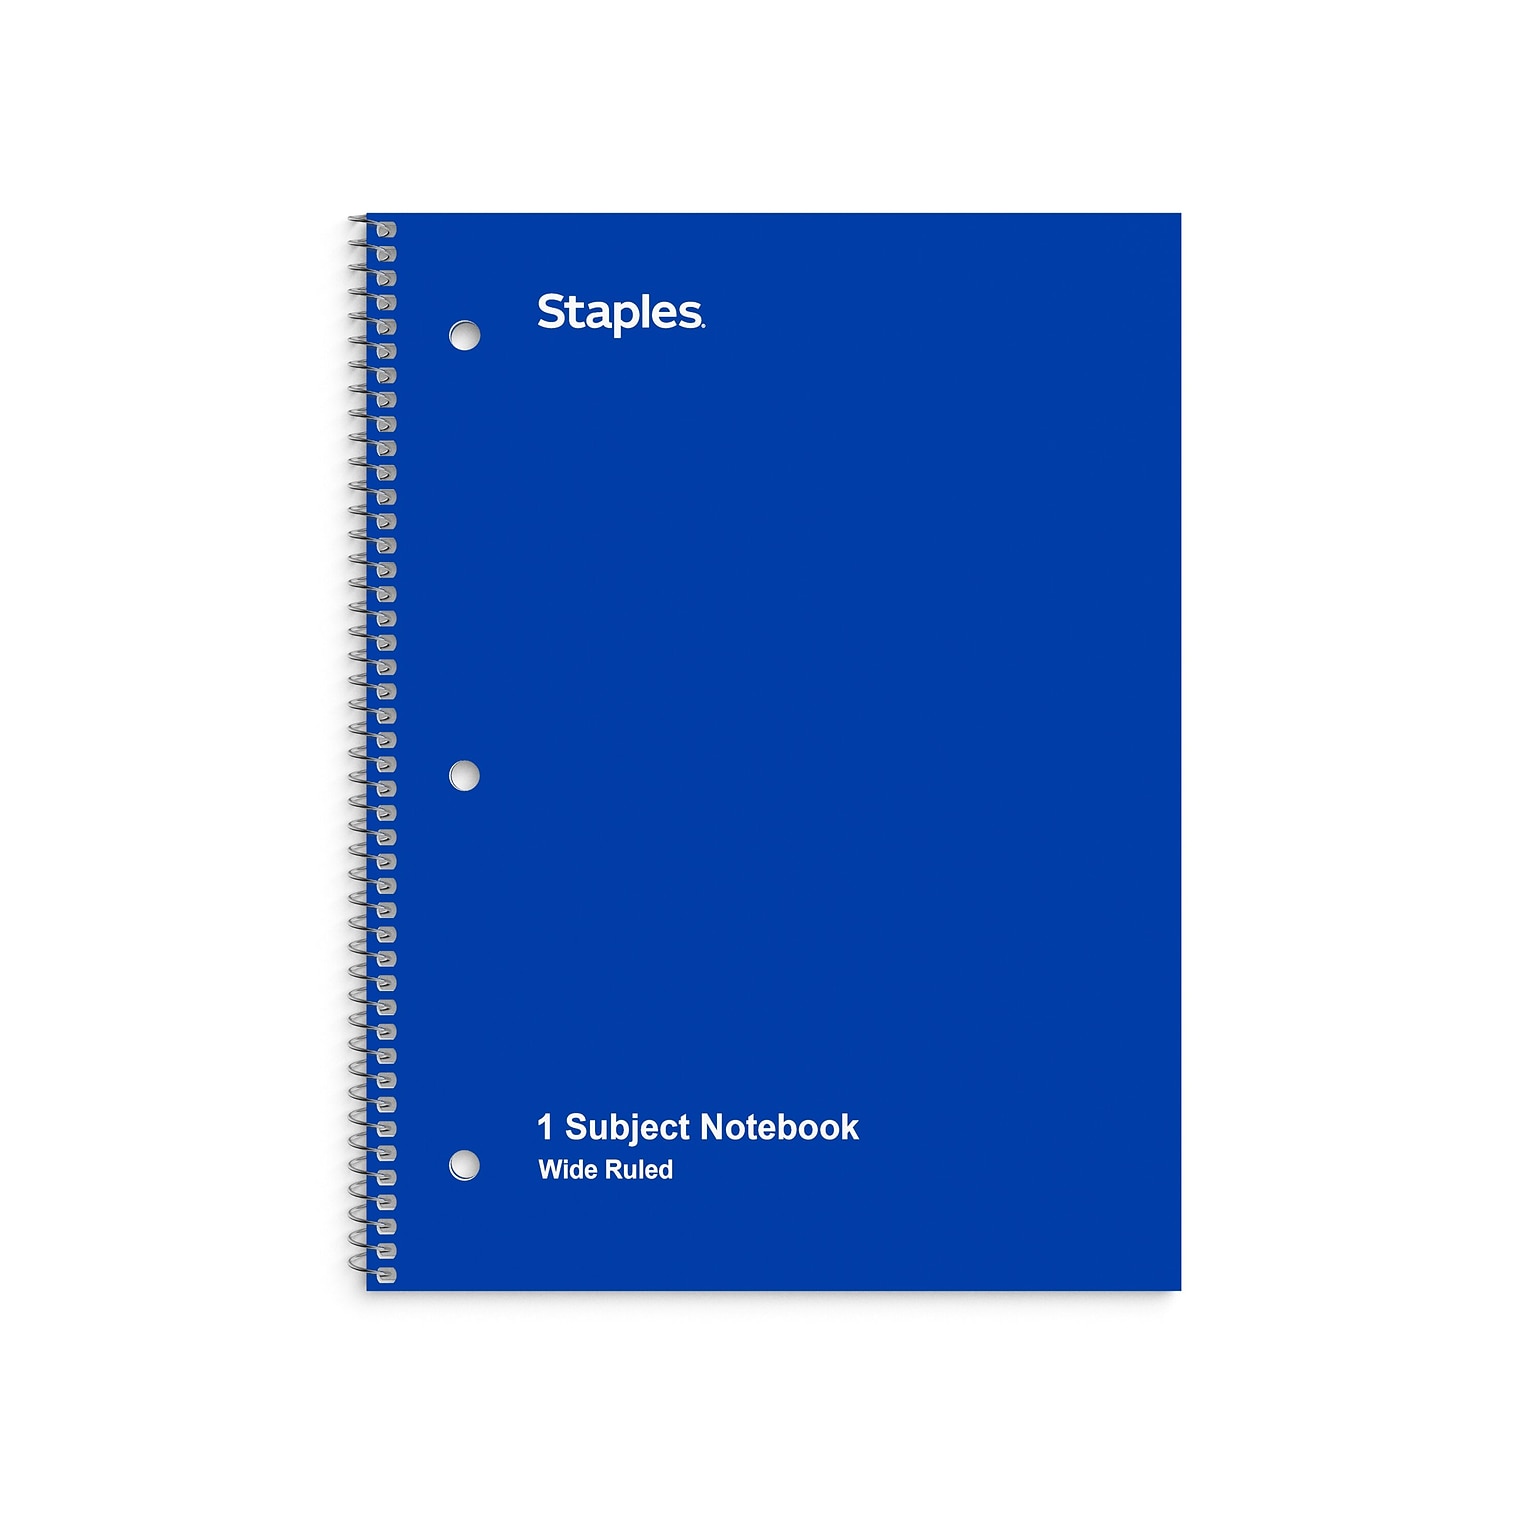 Staples 1-Subject Notebook, 8 x 10.5, Wide Ruled, 70 Sheets, Blue (TR24003)